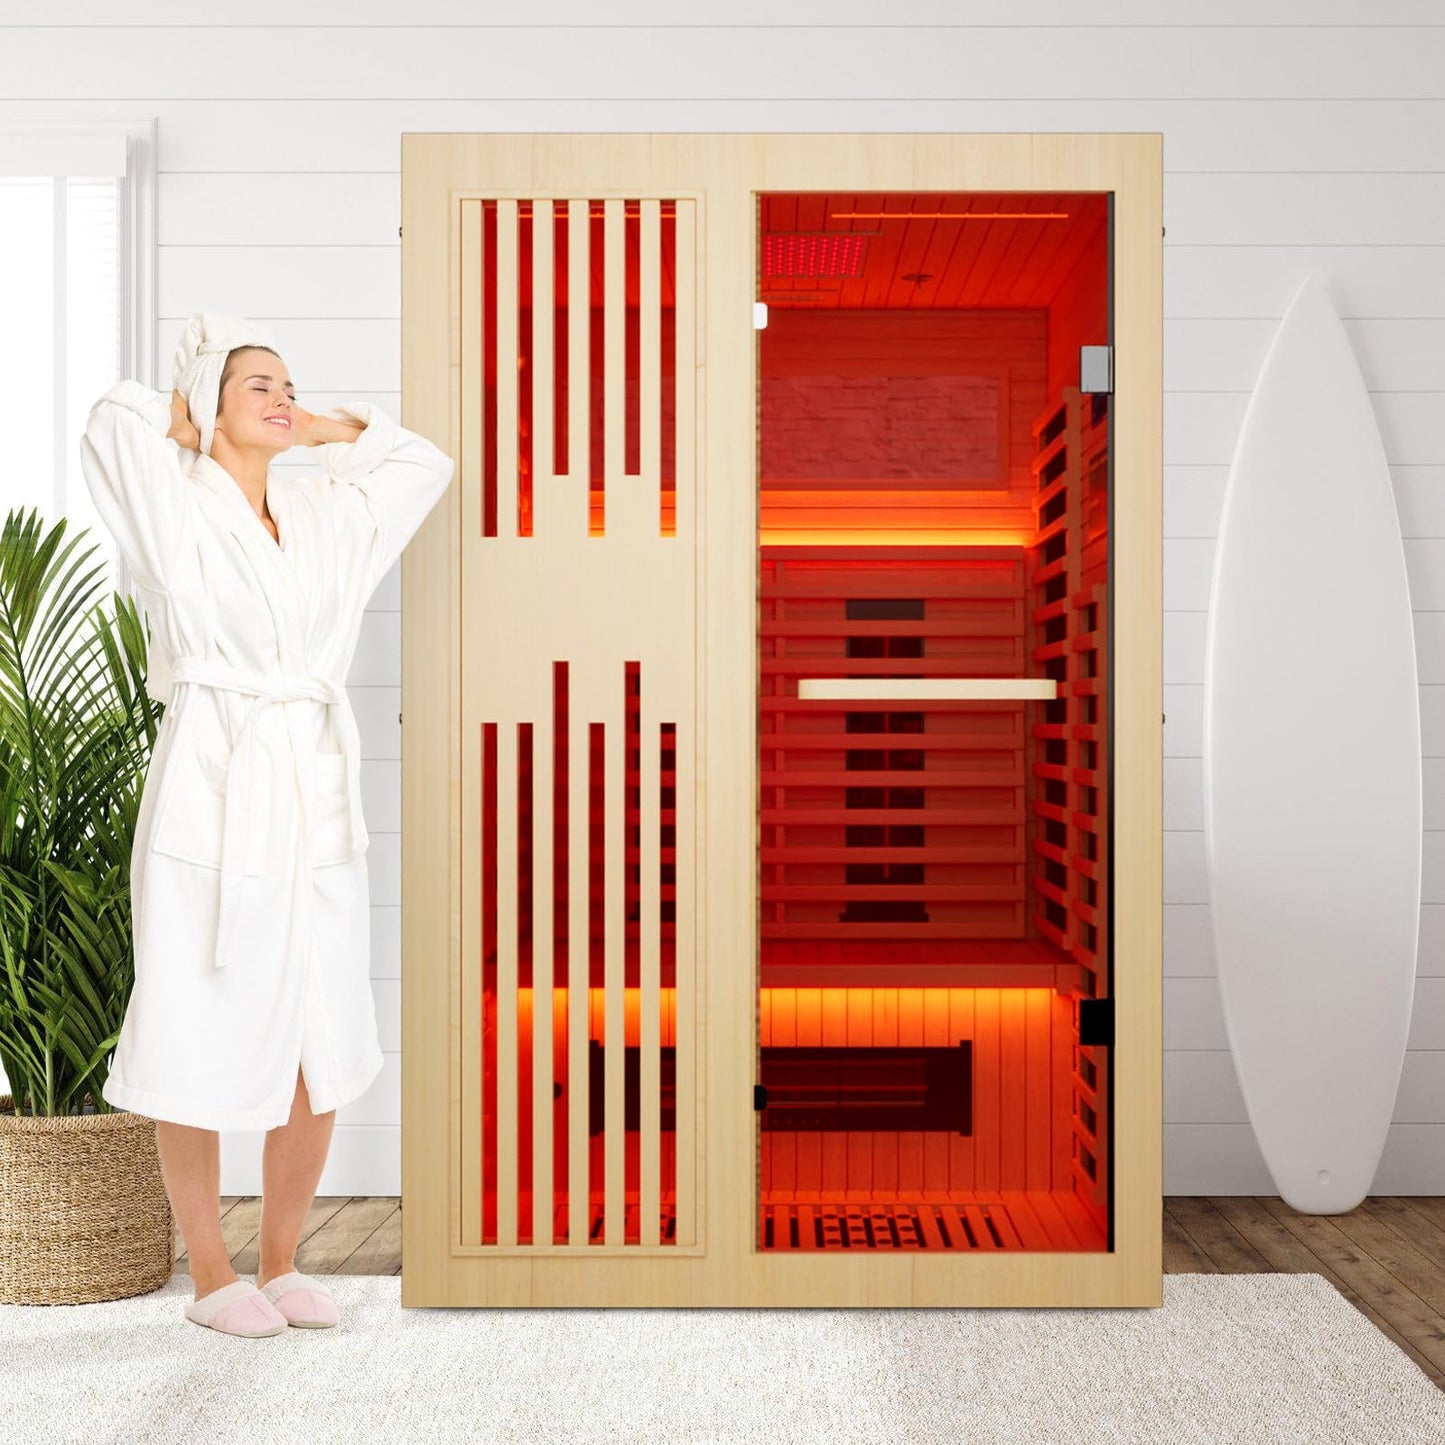 SAUNAERA Full Spectrum Sauna for Home,1~2 Person Indoor Sauna Room with 10 Minutes Warm-up Heate,Low EMF,Canadian Hemlock Wood Home Infrared Sauna with Bluetooth. and Tempered Glass